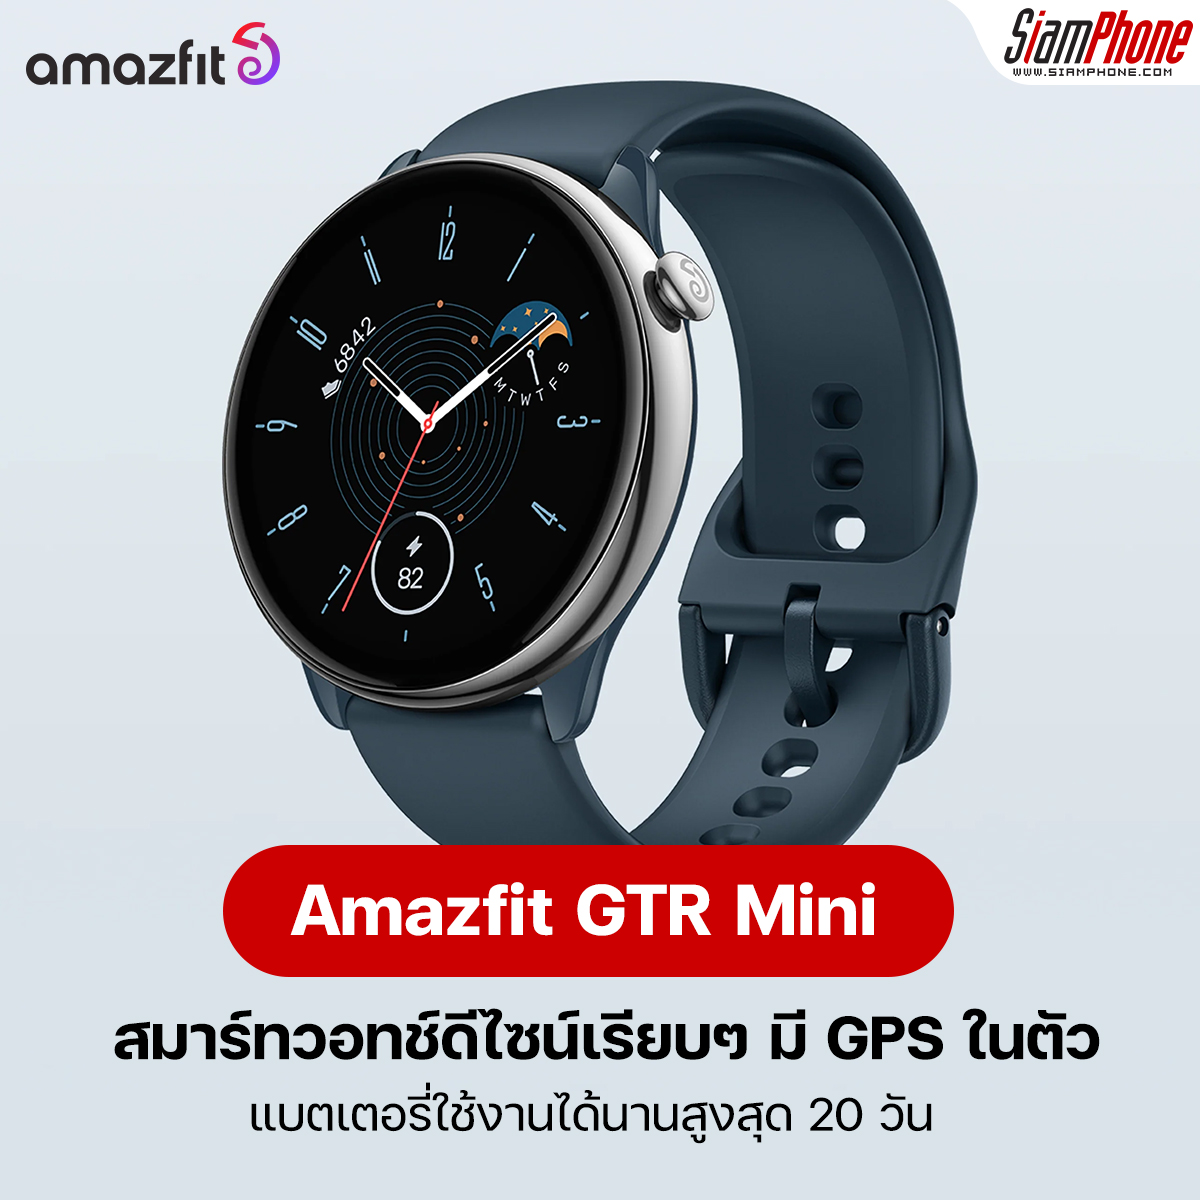 Amazfit GTR Mini, smart watch with simple design, built-in GPS, battery life up to 20 days